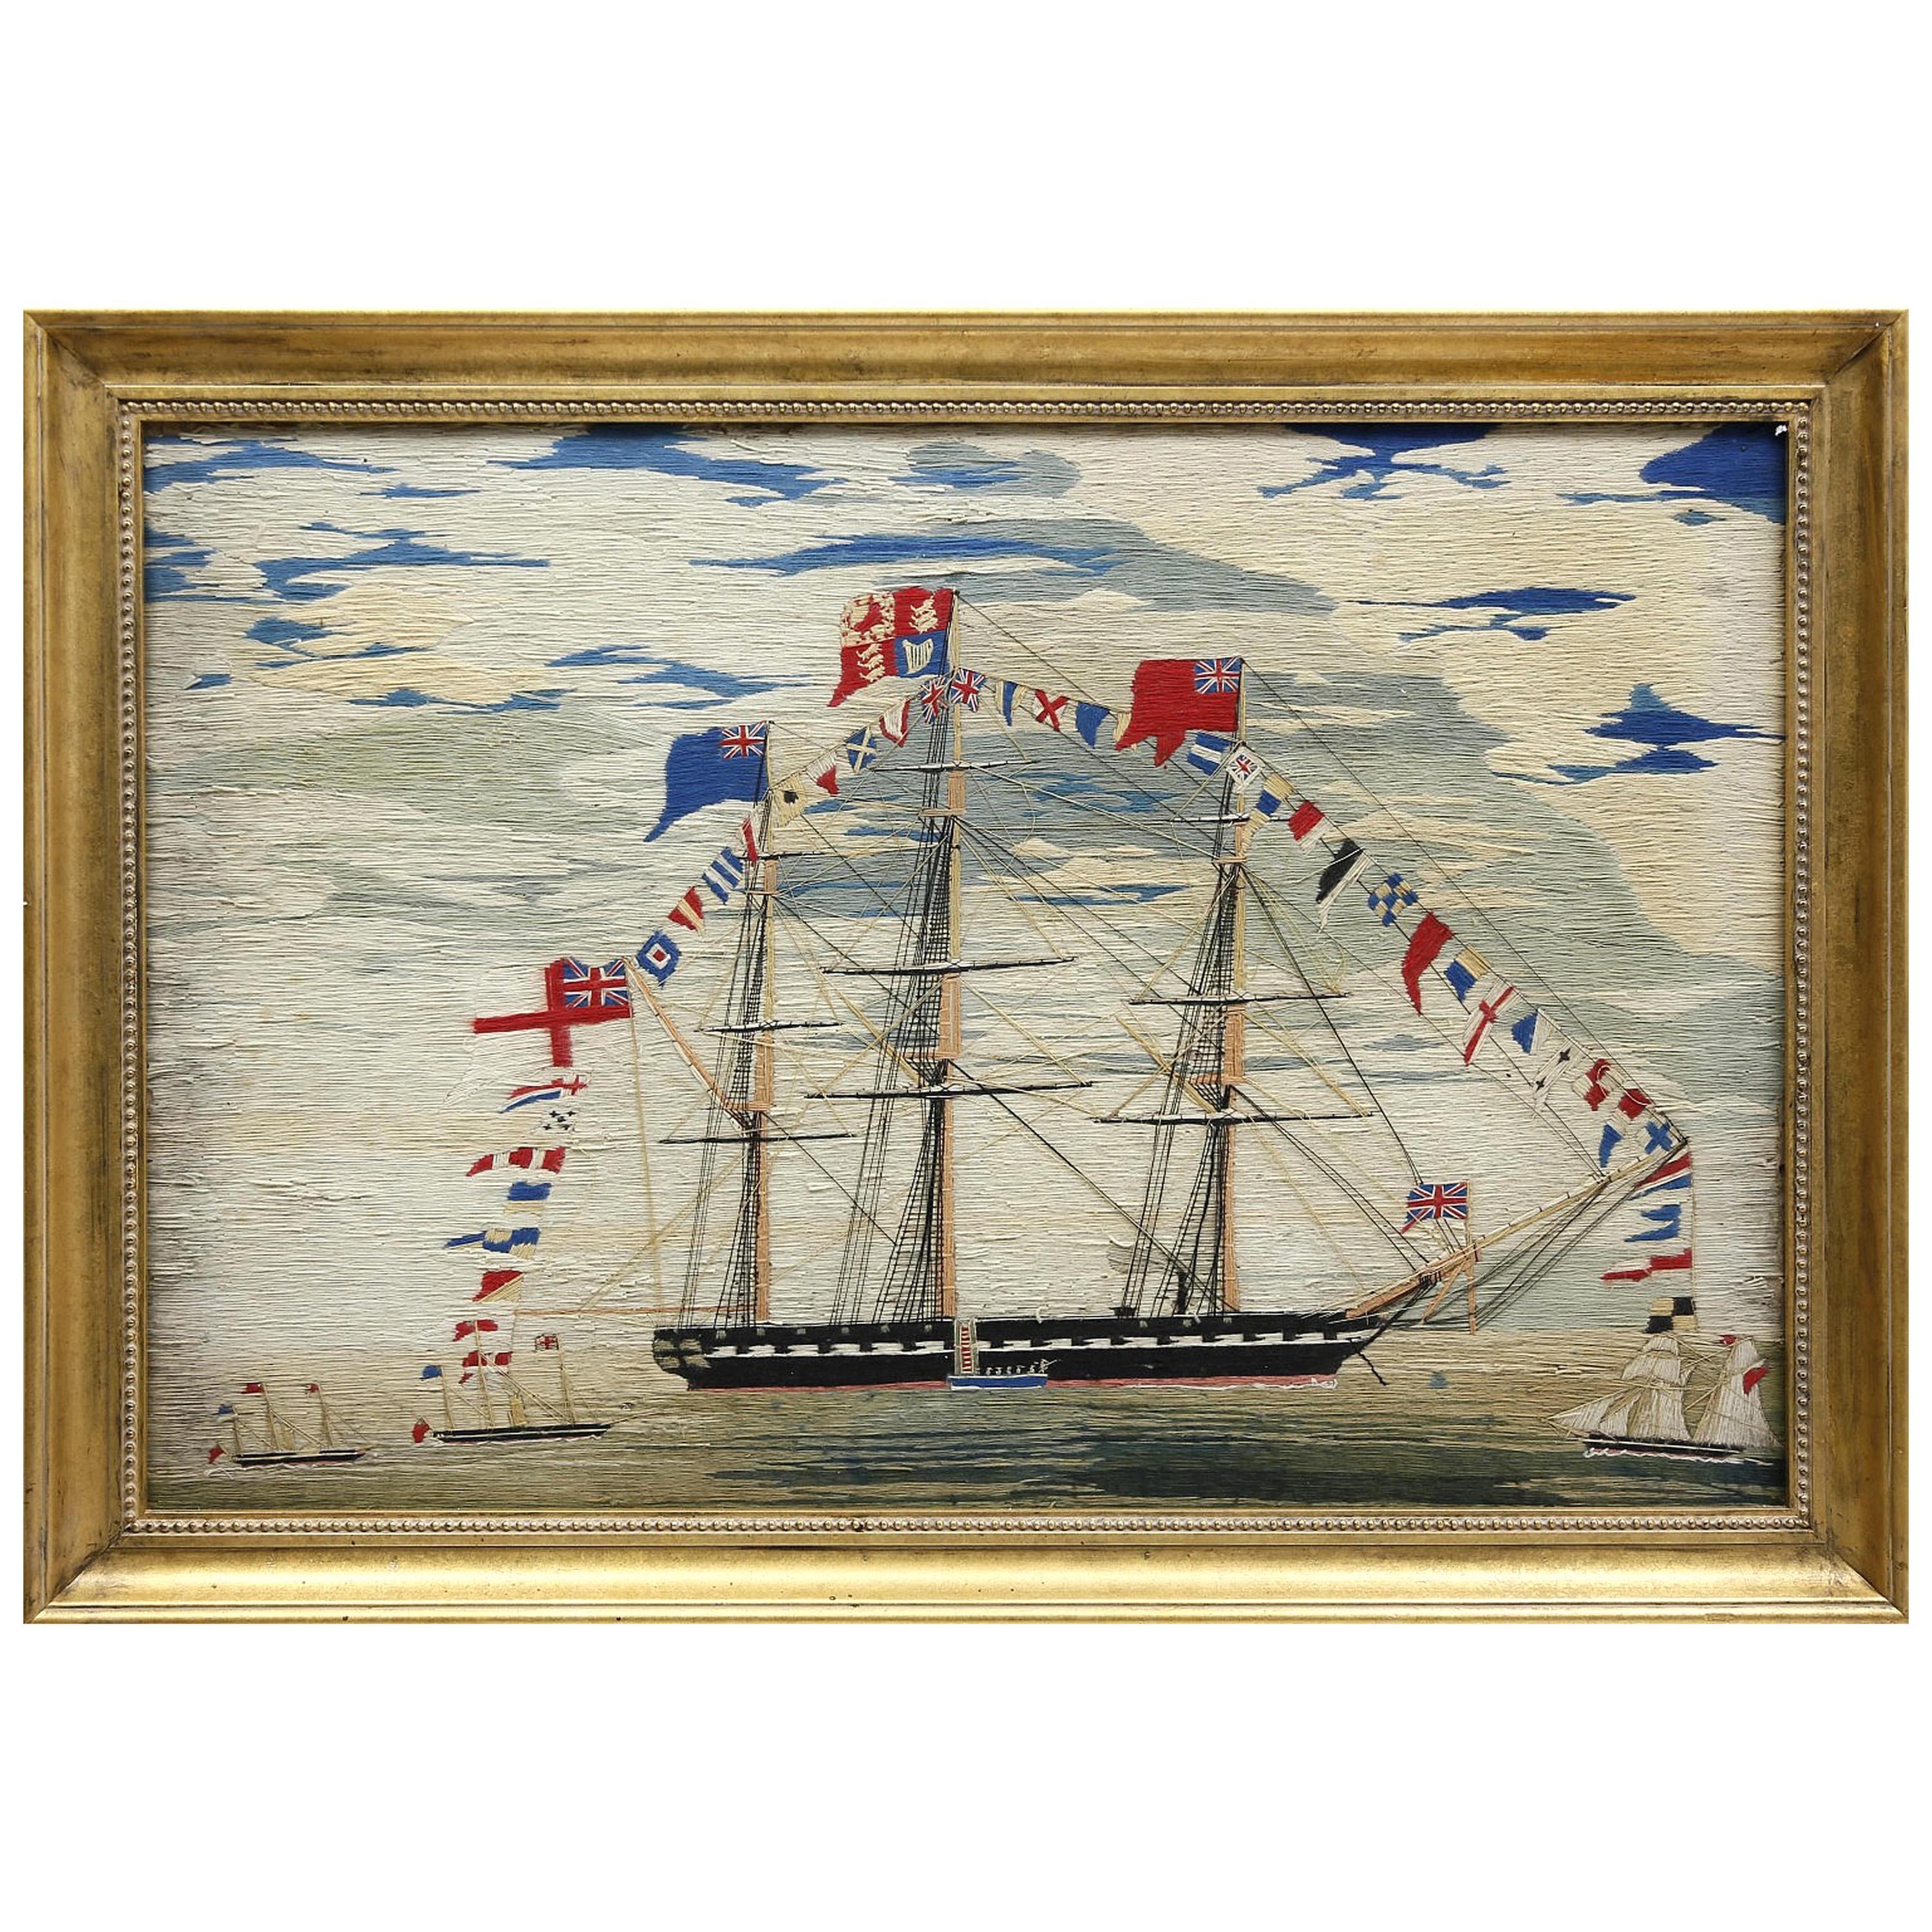 Large Sailor's Woolwork or Woolie of a Fully Dressed Royal Navy Frigate